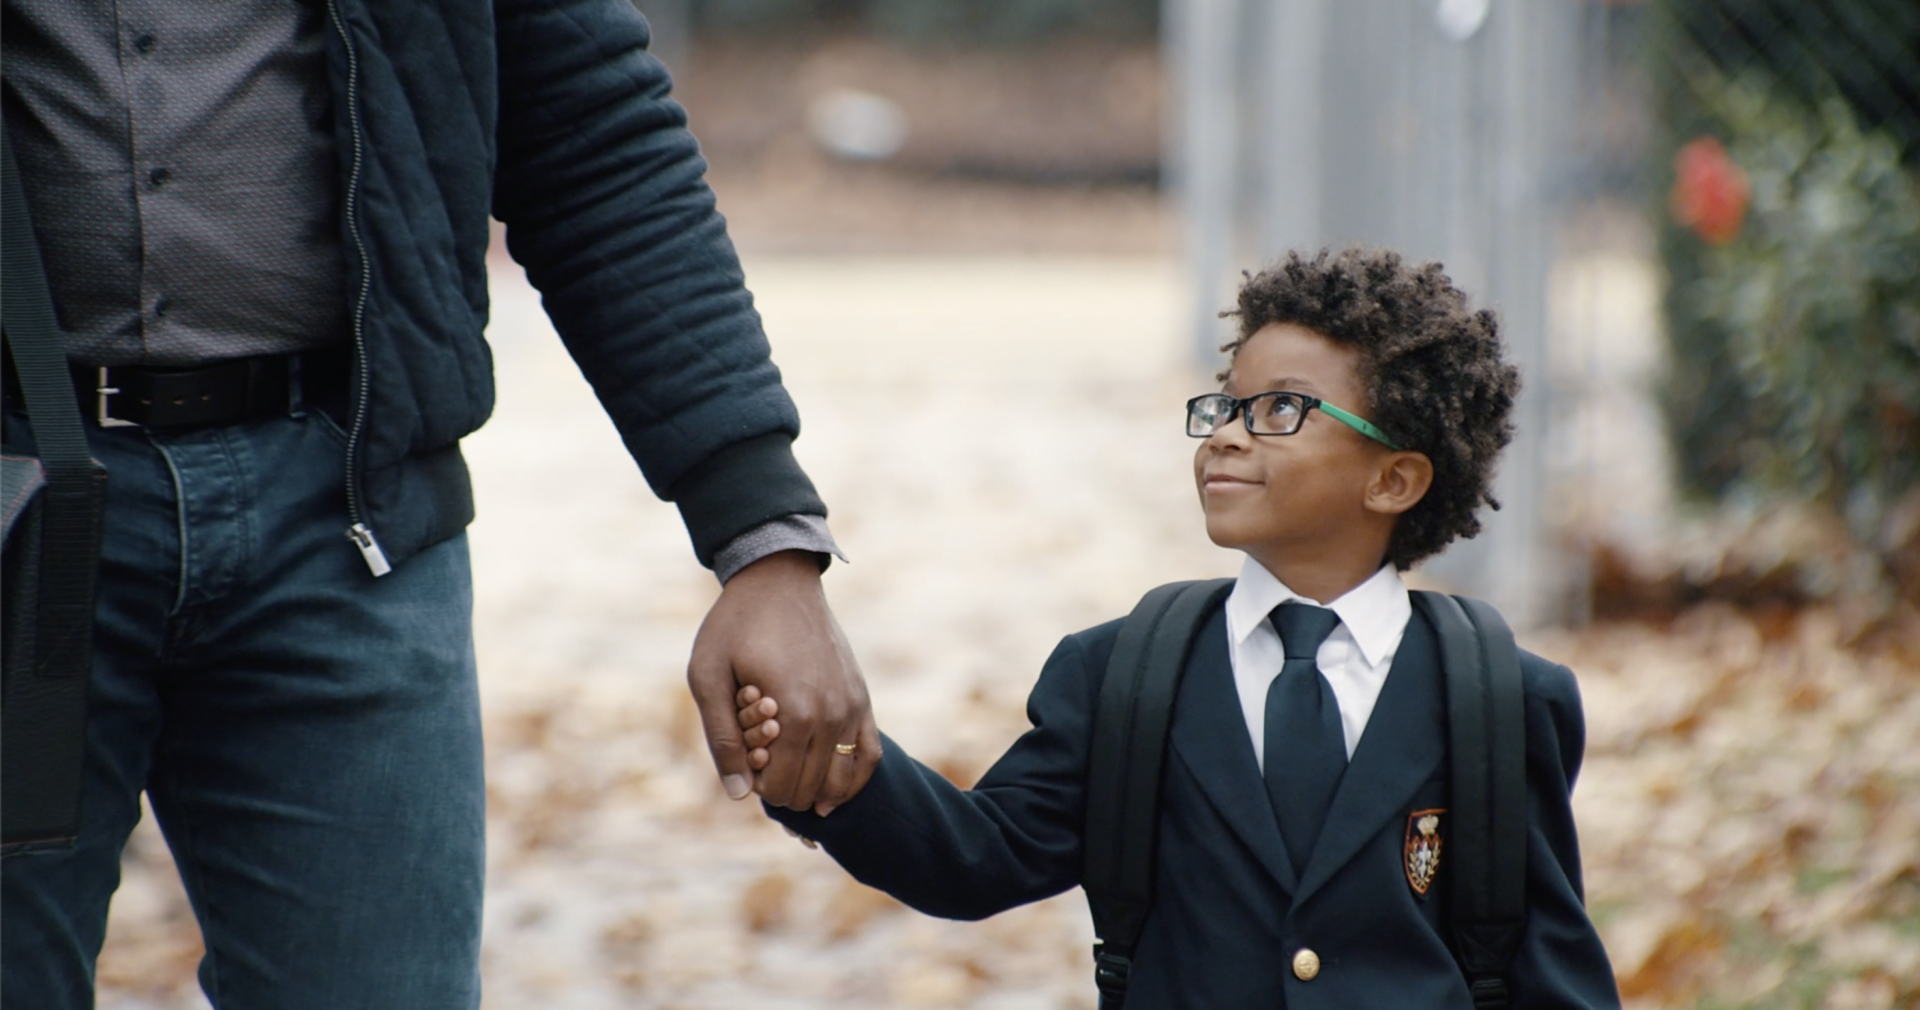 McDonald's shines positive light on Black community with new campaign